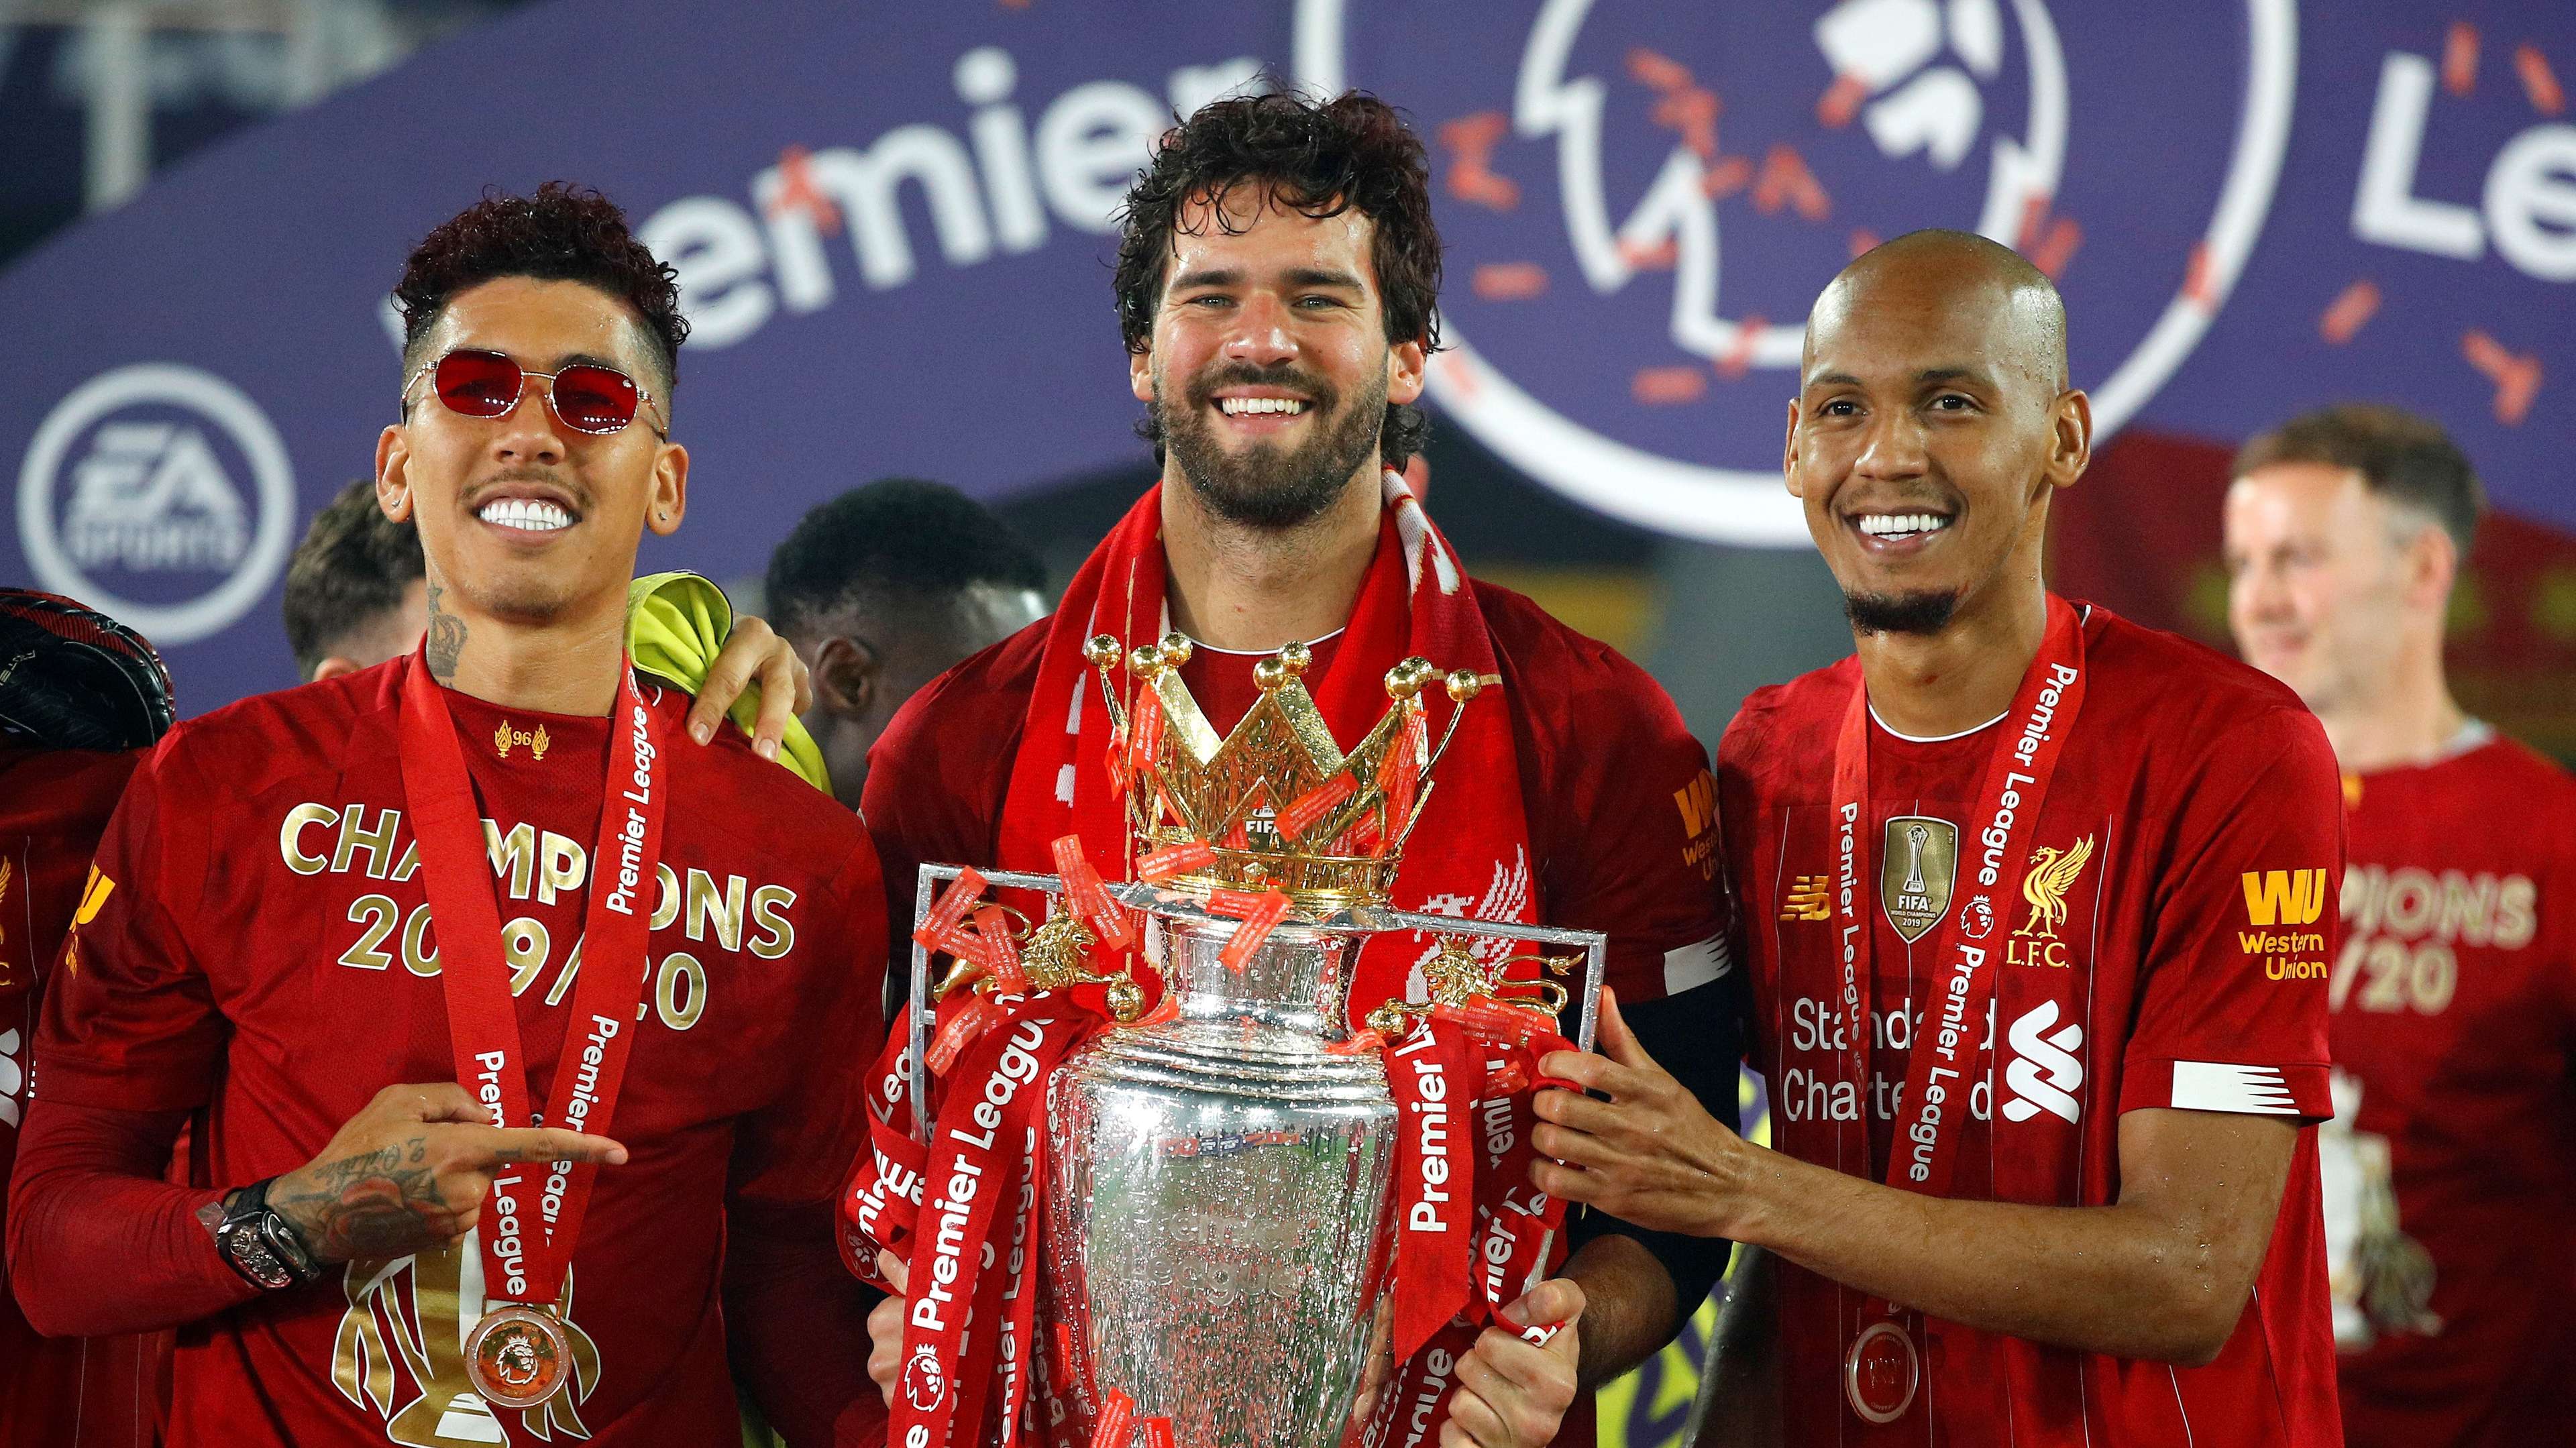 Liverpool lifts The Premier League trophy following the Premier League match between Liverpool FC and Chelsea FC at Anfield on July 22, 2020